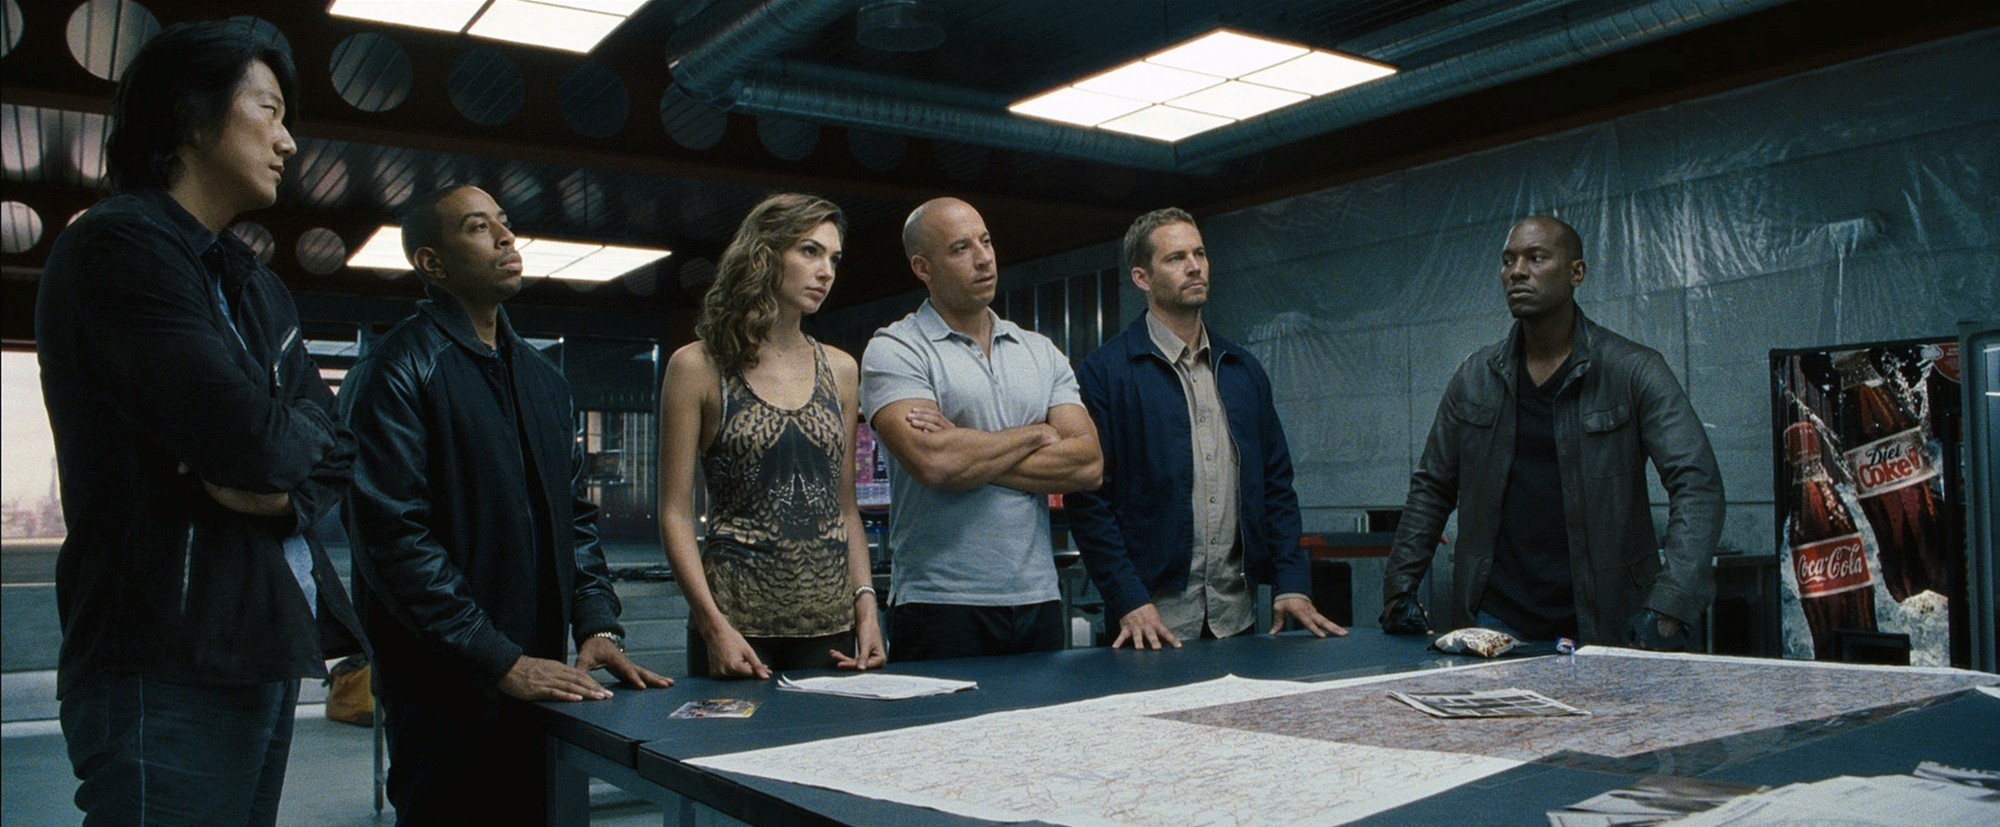 Sung Kang, Ludacris, Elsa Pataky, Vin Diesel, Paul Walker and Tyrese Gibson in Universal Pictures' Fast and Furious 6 (2013)